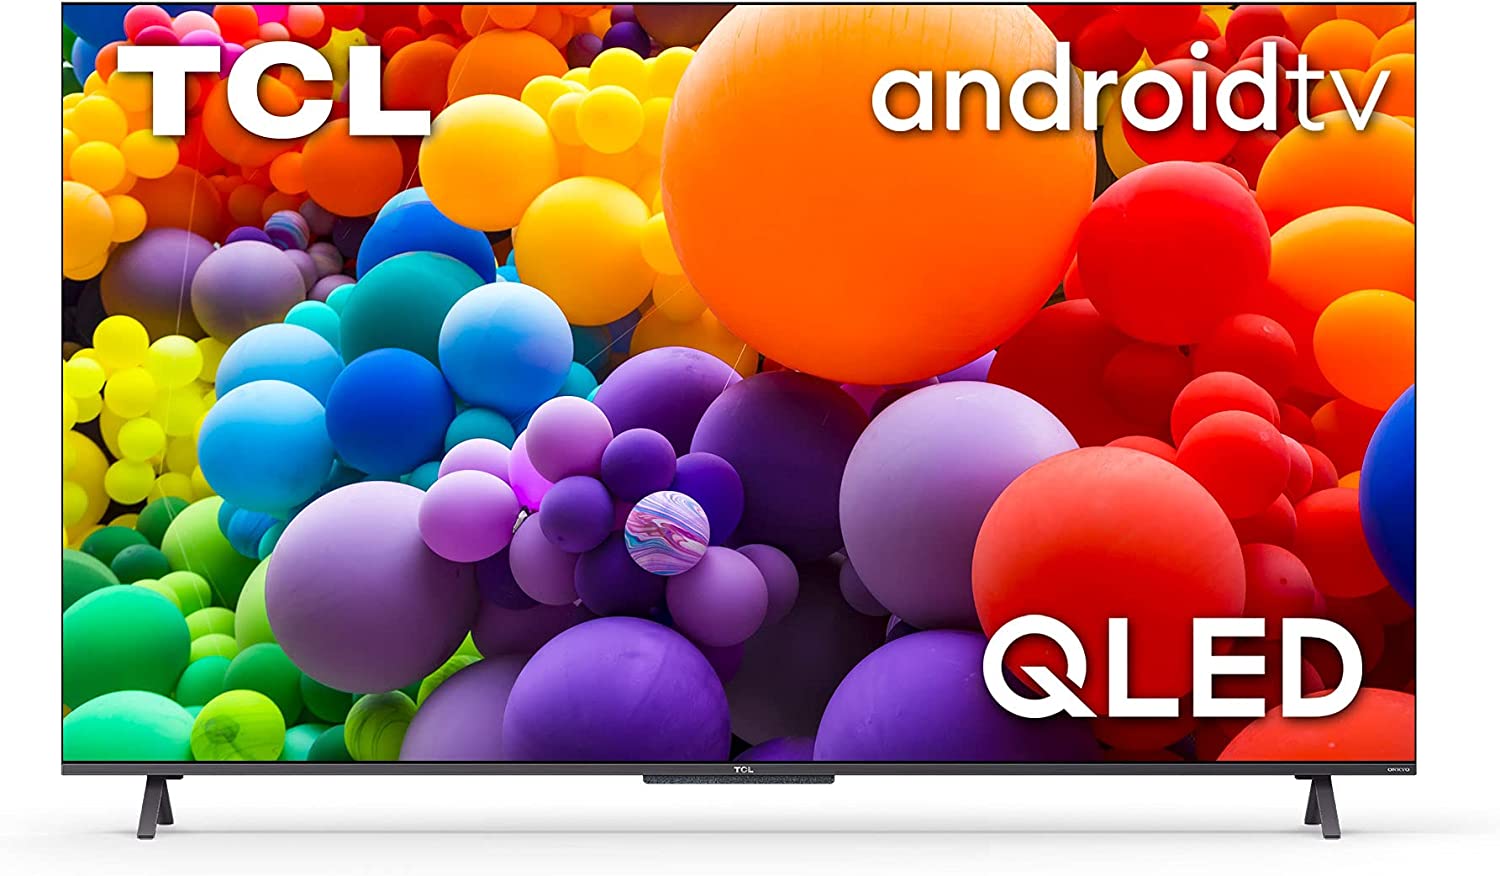 TV QLED 50" - TCL 50C722, 4K UHD, Android TV 11.0, Motion Clarity, Dolby Vision & Atmos, Game Master, Onkyo 2.1